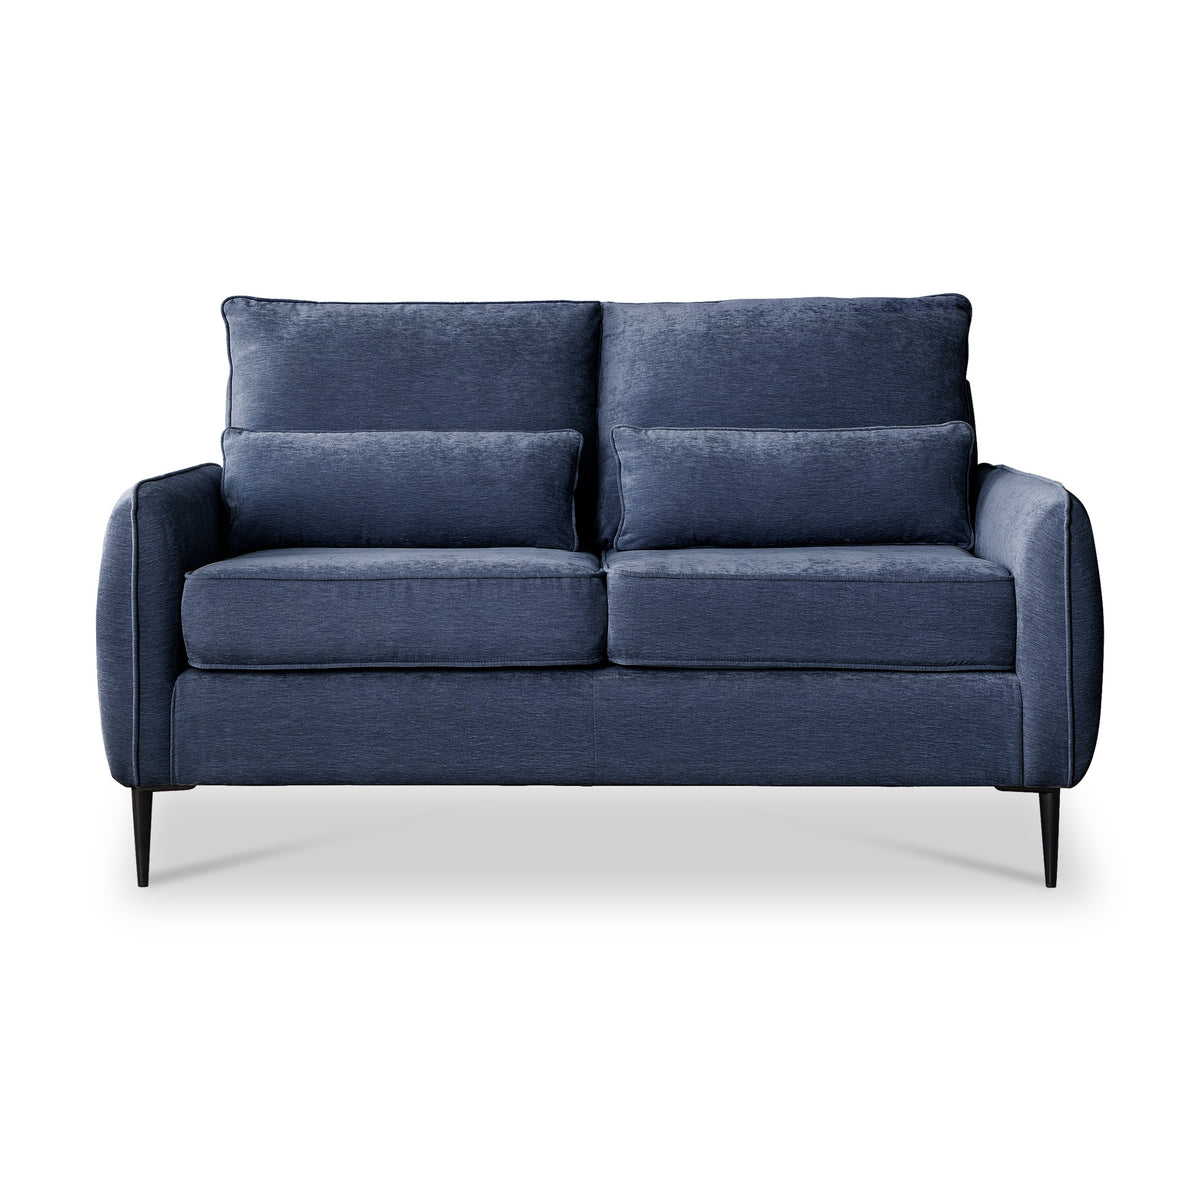 Oswald Navy Blue 2 Seater Sofa from Roseland Furniture